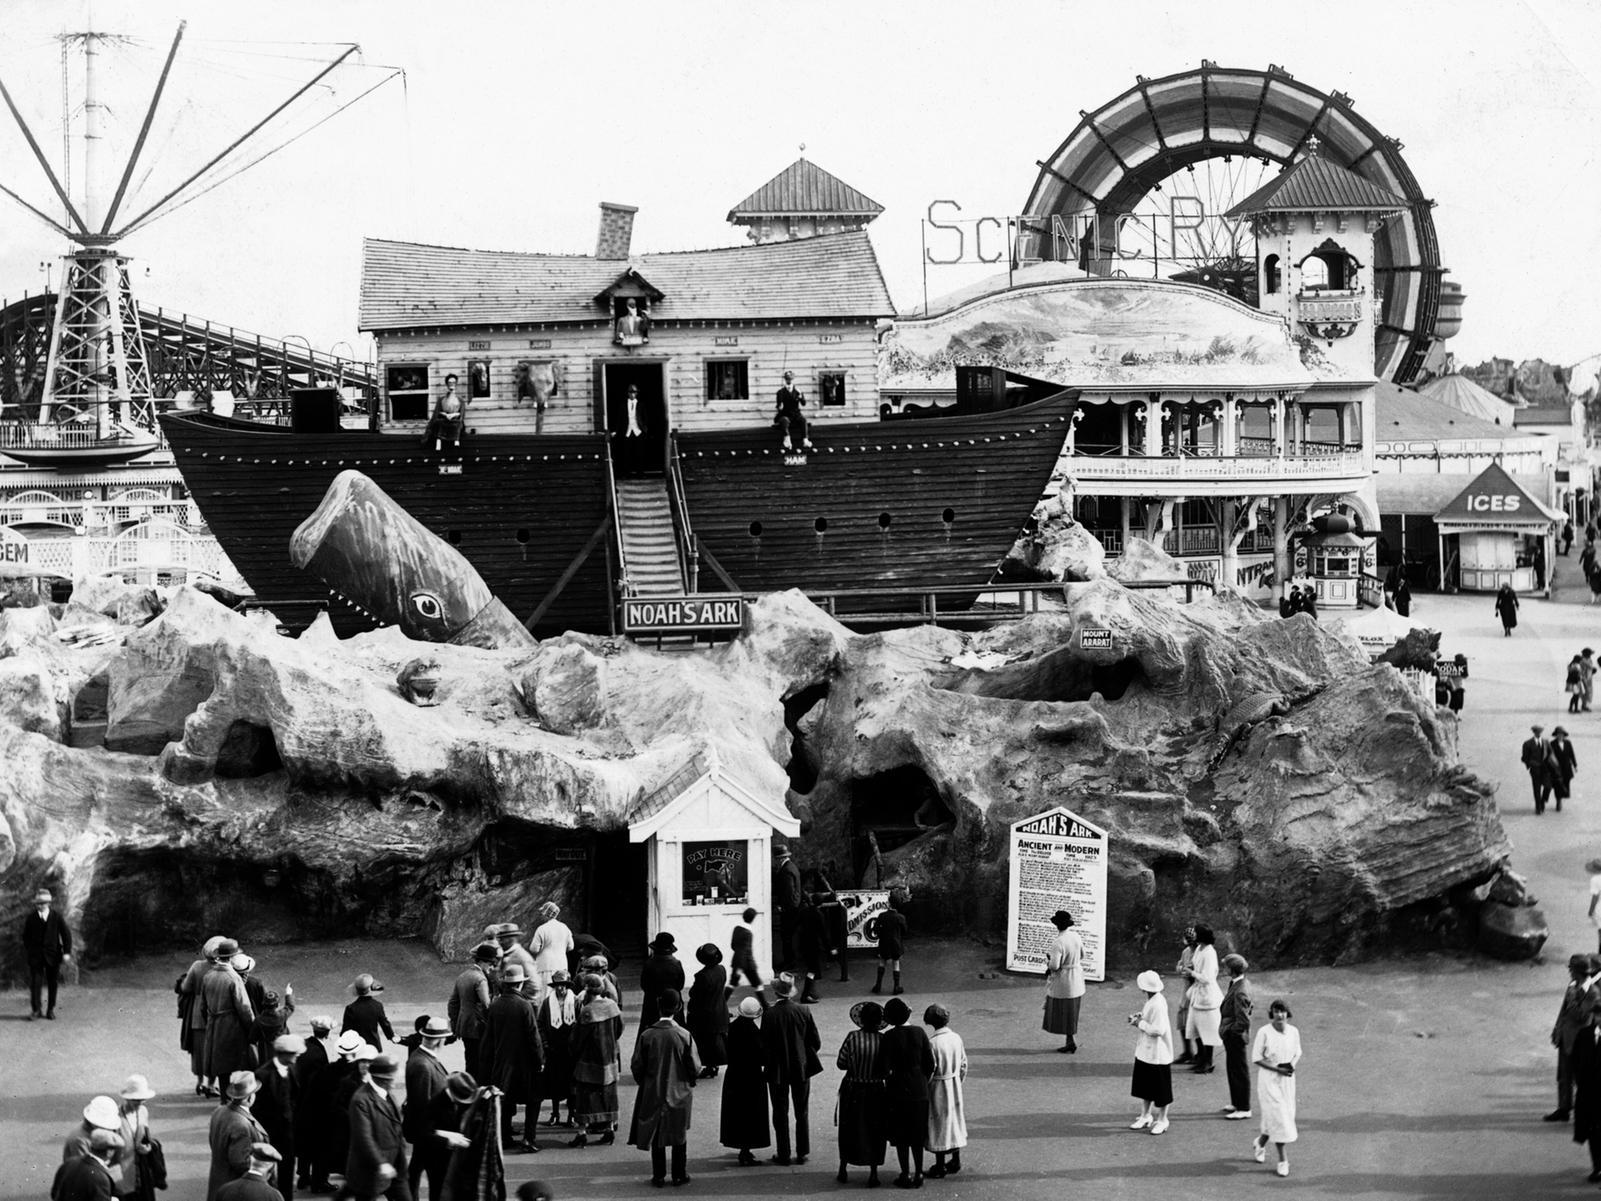 A walk-through dark ride of 1922 designed by noted rollercoaster designer William H Strickler. It comprises a large wooden boat mounted on a rocking mechanism surrounded by a single-storey building intended to represent the top of Mt Ararat, with a pool of water surrounding the boat.